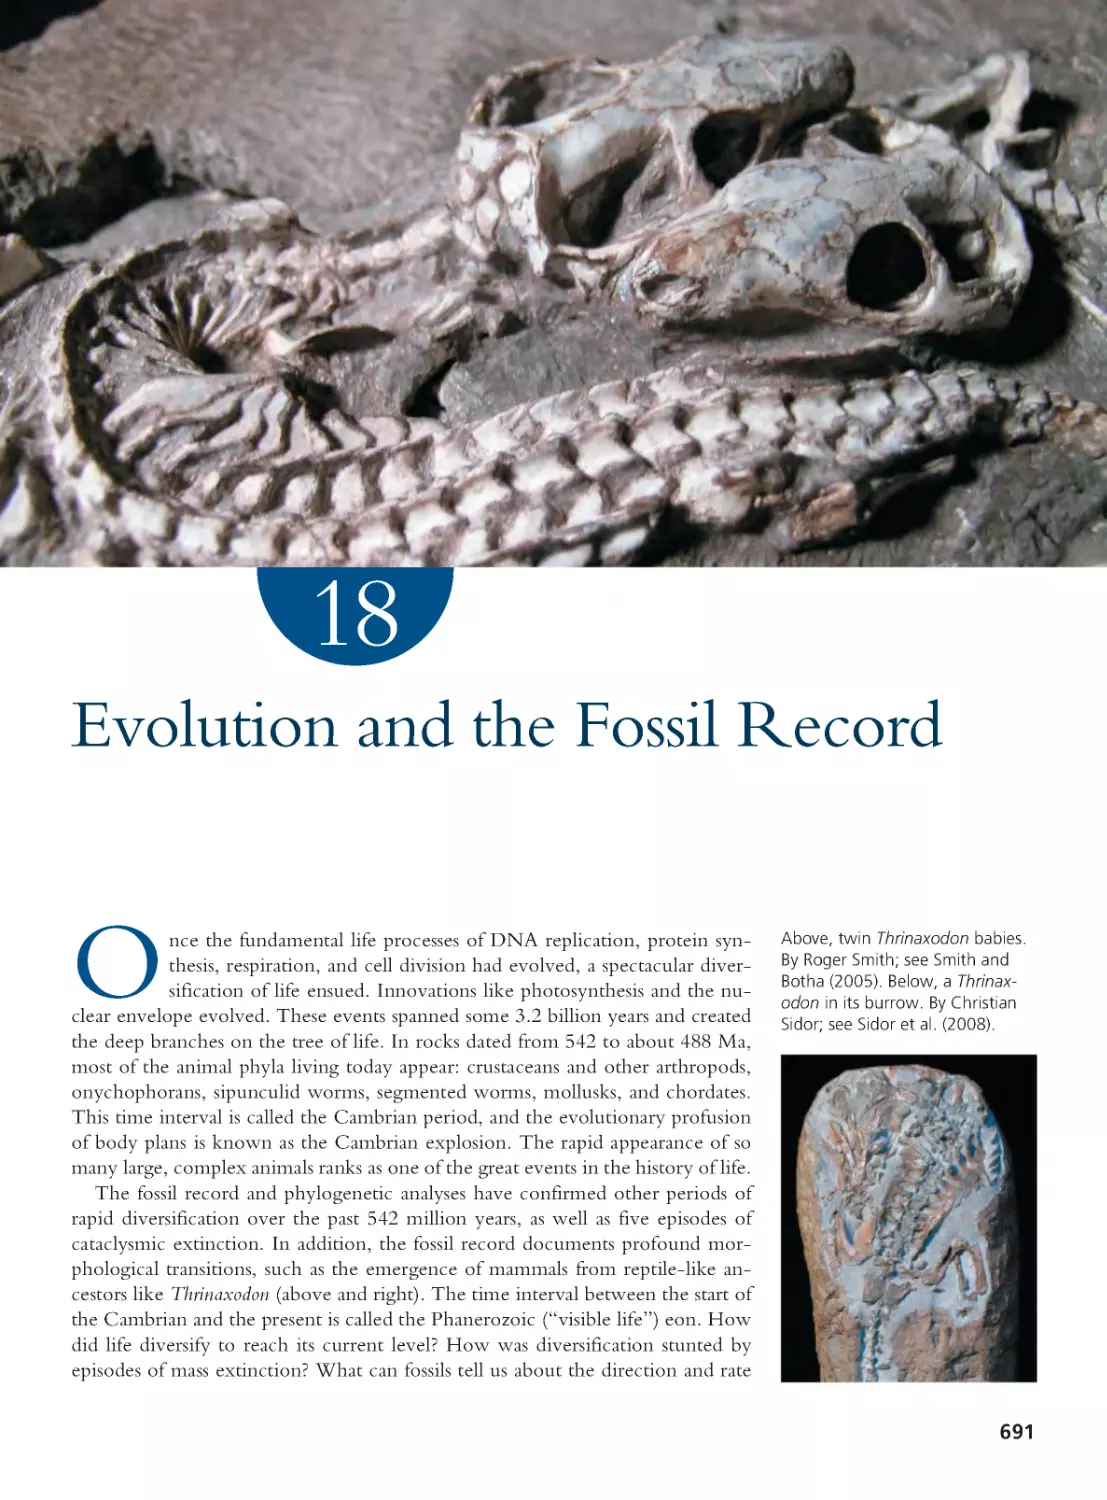 CHAPTER 18 Evolution and the Fossil Record